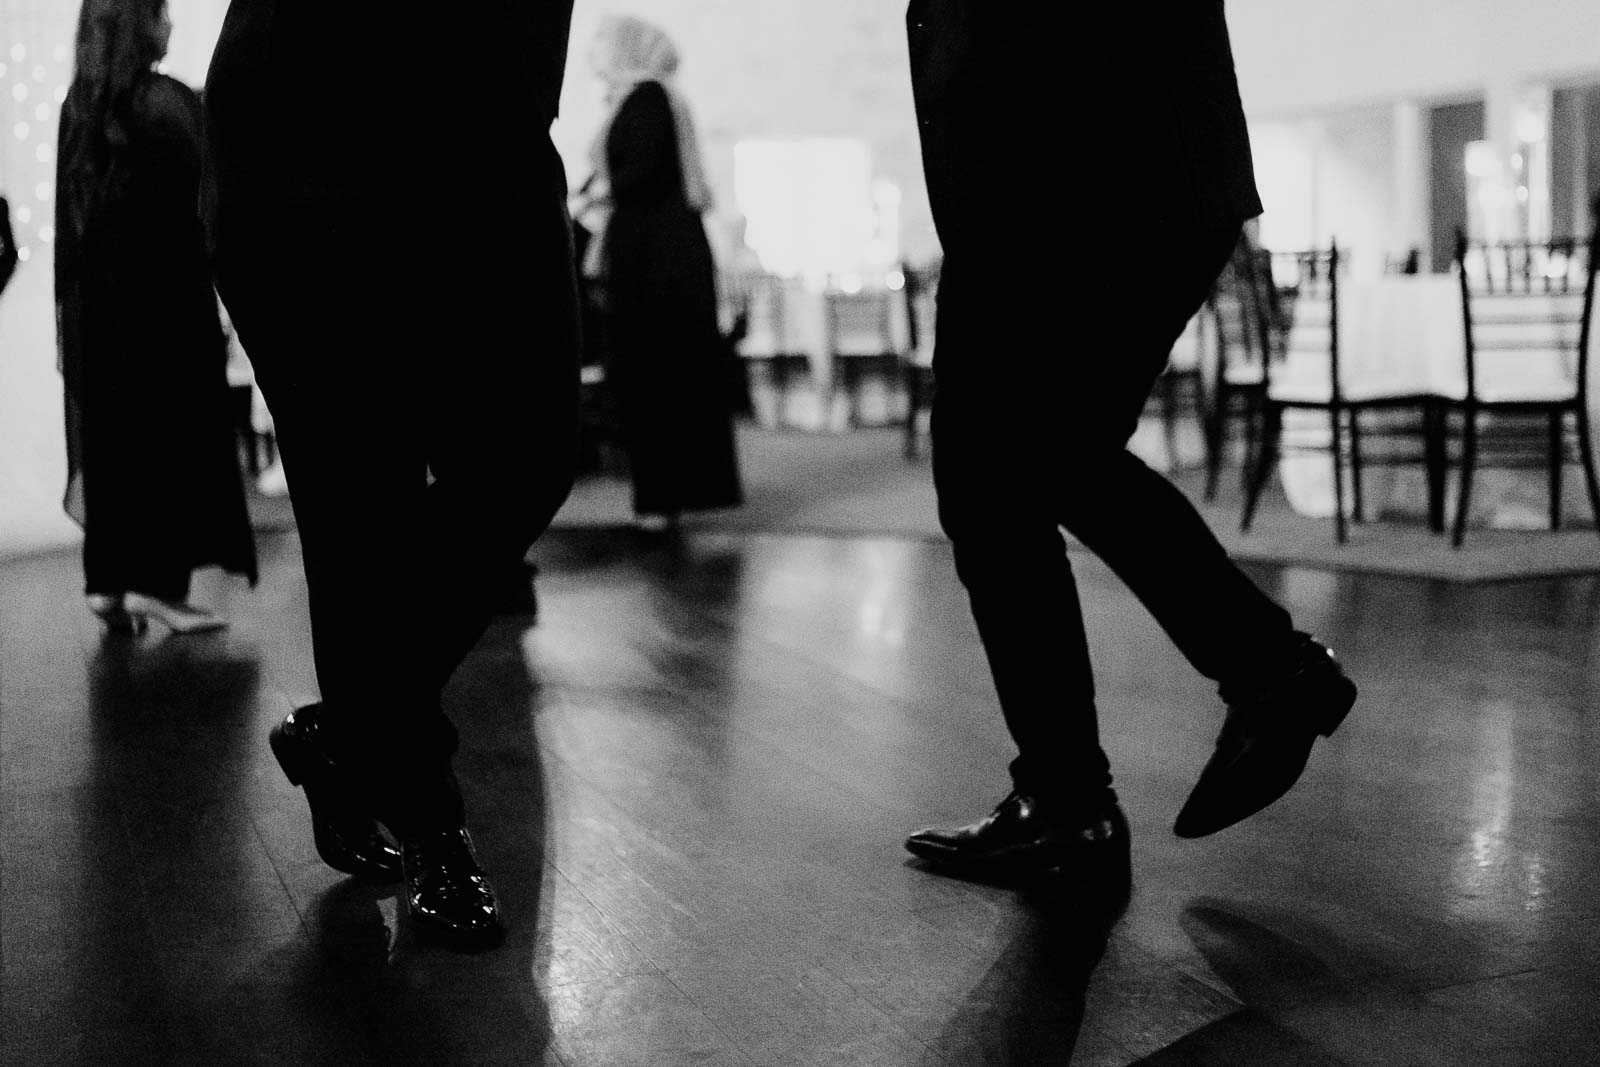 Guests dance silhouetted against floor